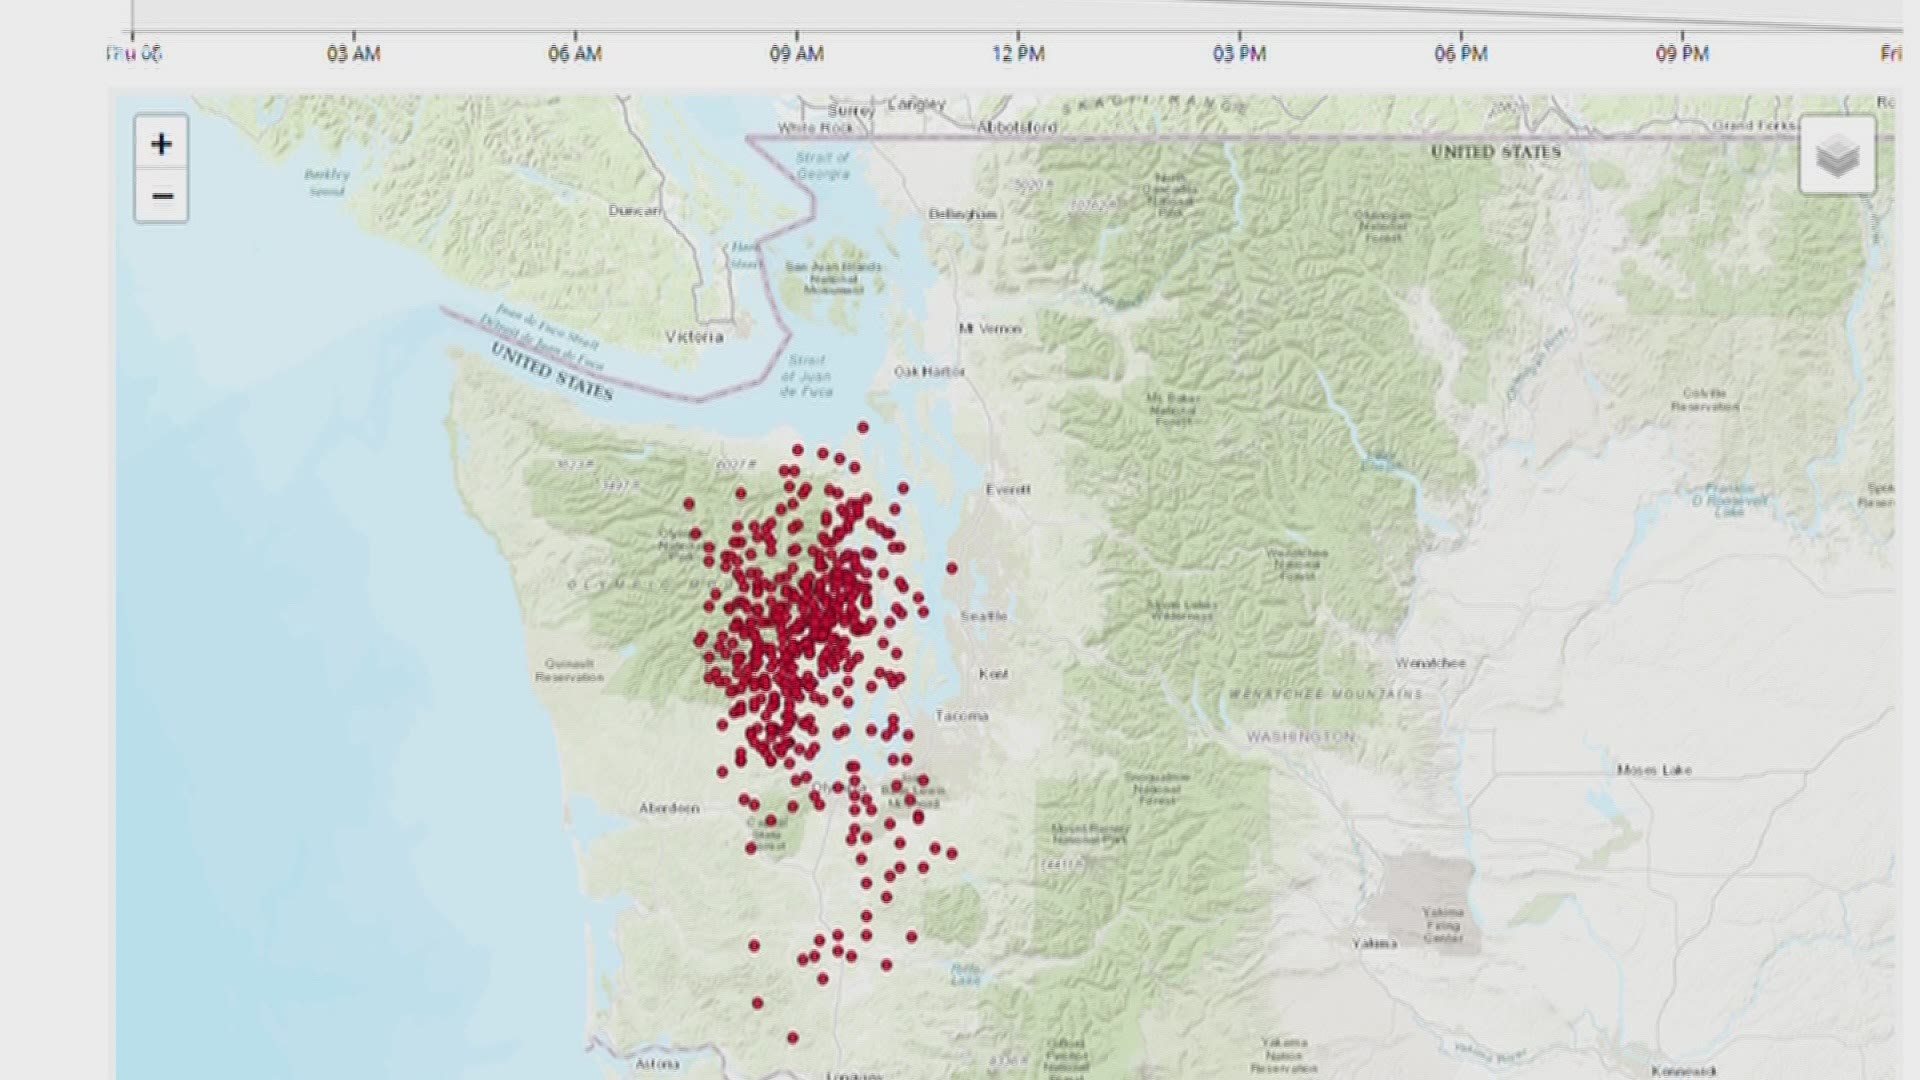 These silent quakes release the equivalent energy of a magnitude 6 earthquake, in the range of the Nisqually earthquake which occurred nearly 20 years ago.